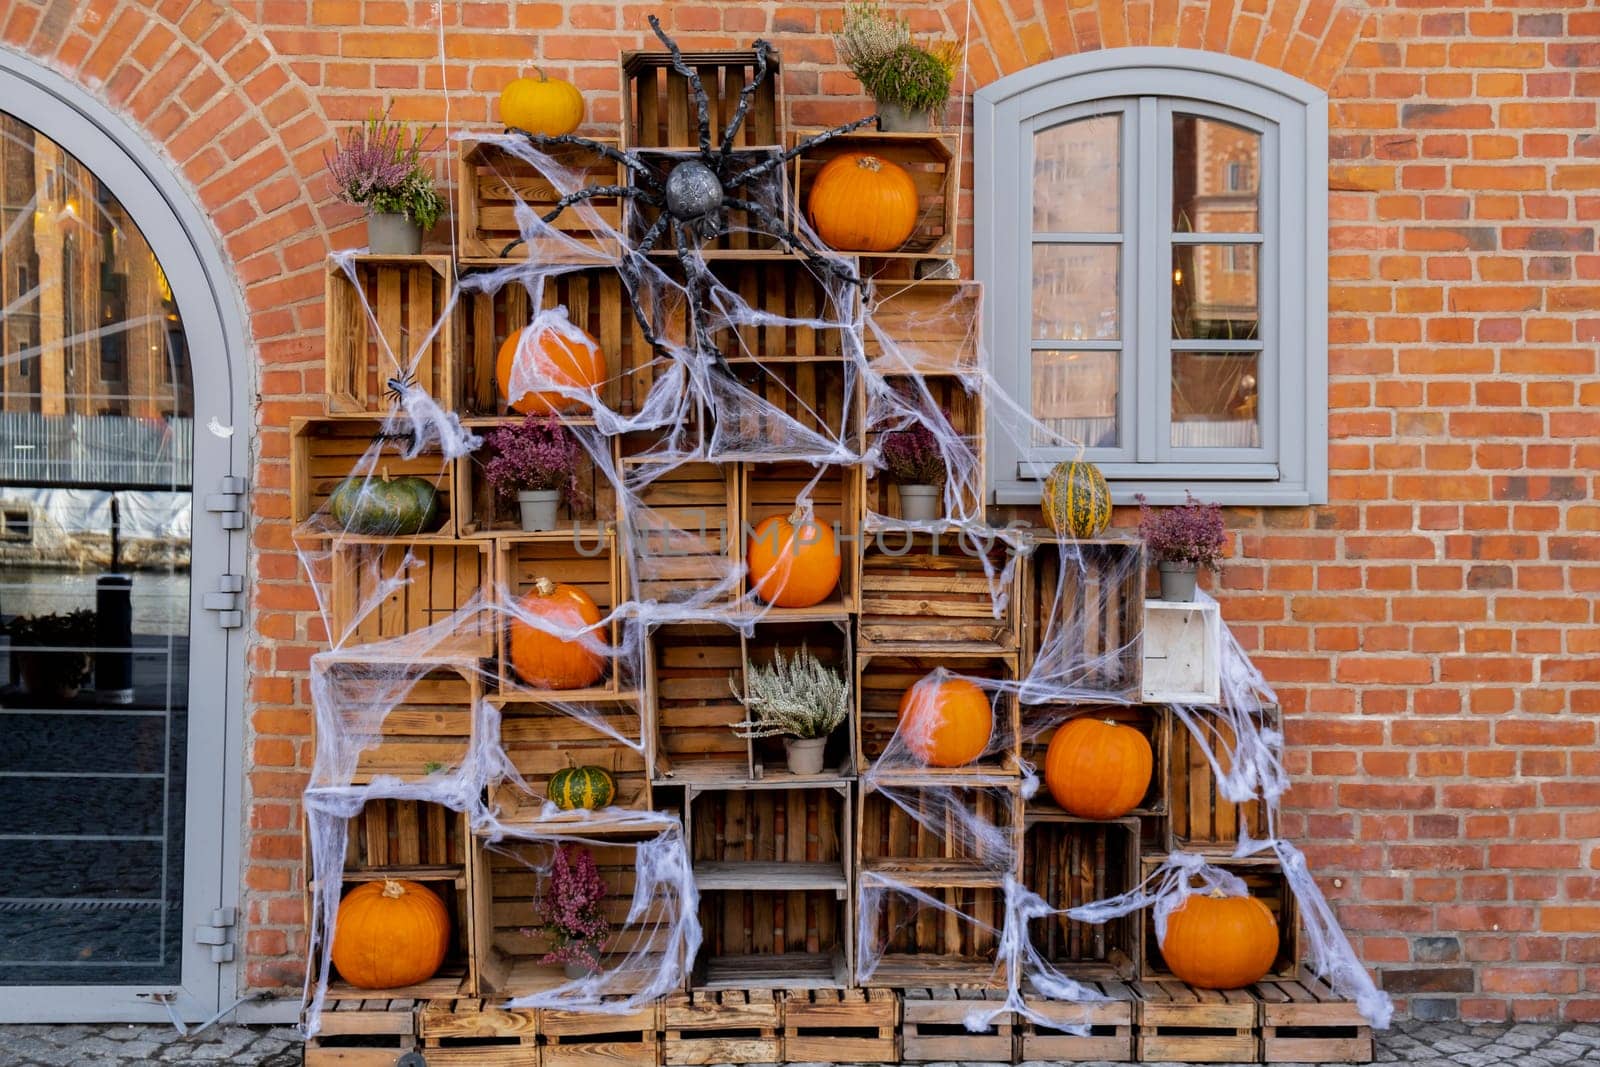 Exterior design cozy atmospheric halloween pumpkins in wooden boxes decorated on porch. Autumn leaves and fall flowers celebration holiday Thanksgiving October season outdoors in city